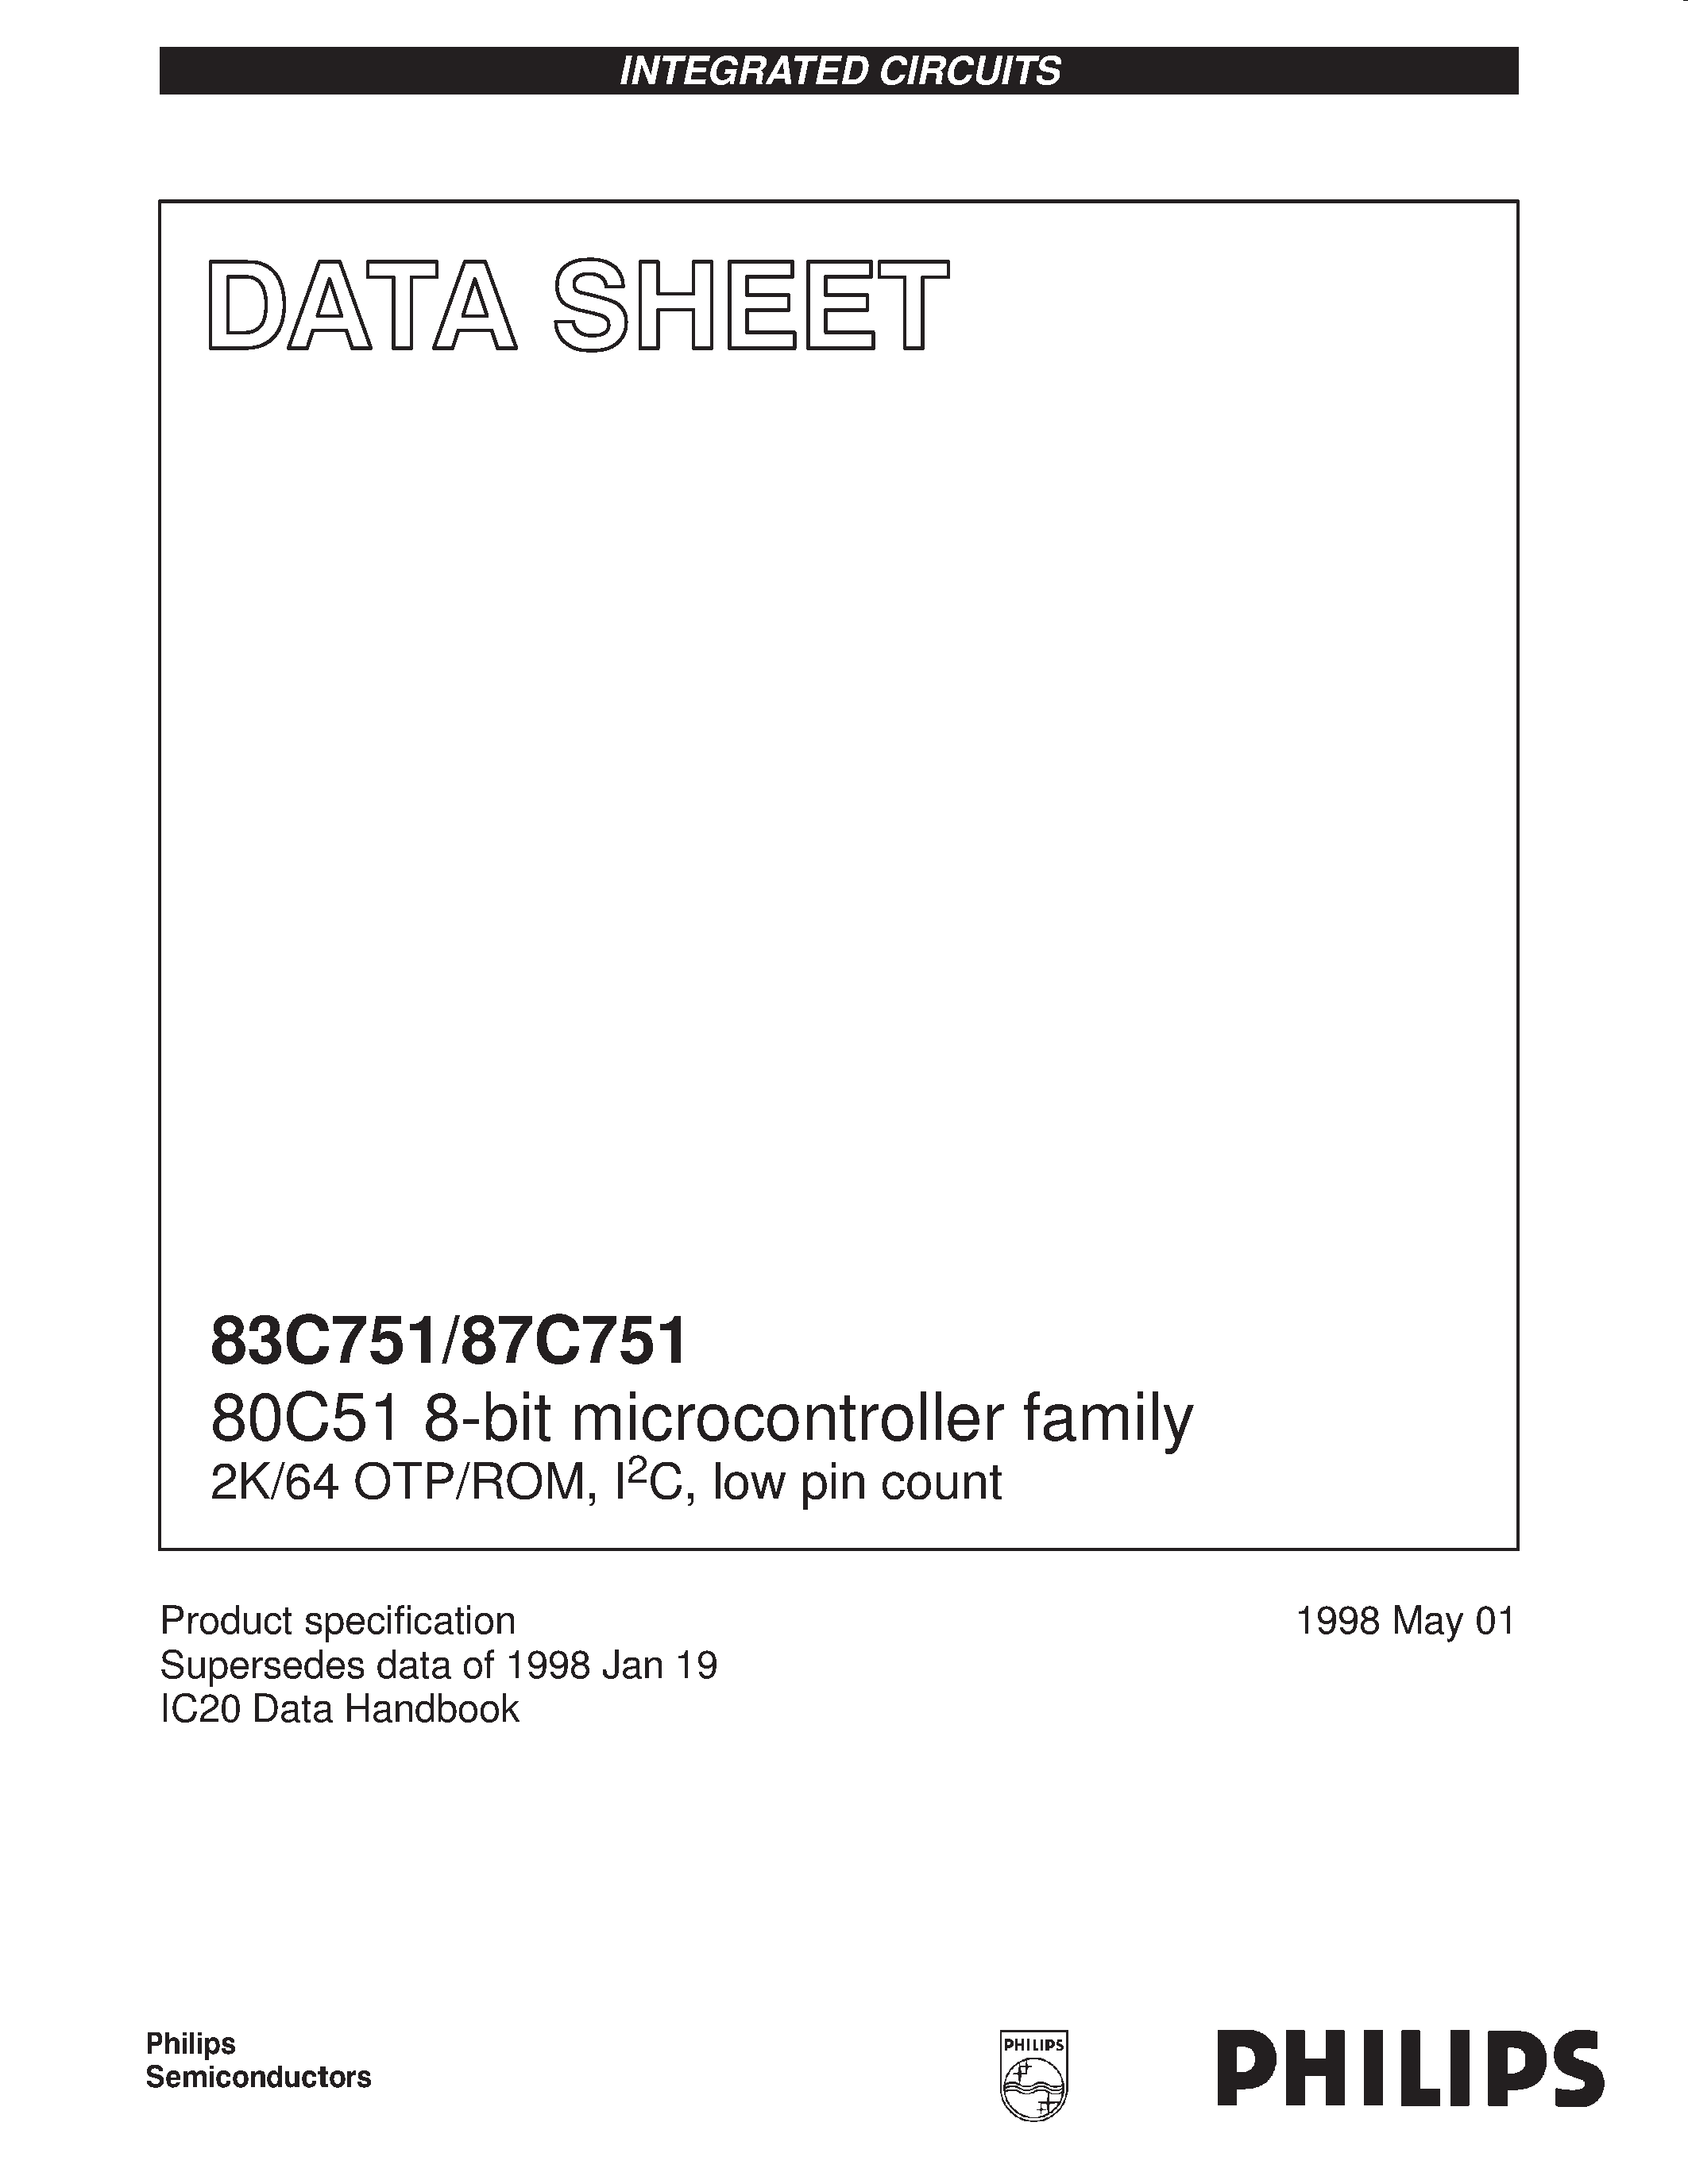 Datasheet S83C751-1N24 - 80C51 8-bit microcontroller family 2K/64 OTP/ROM / I2C / low pin count page 1